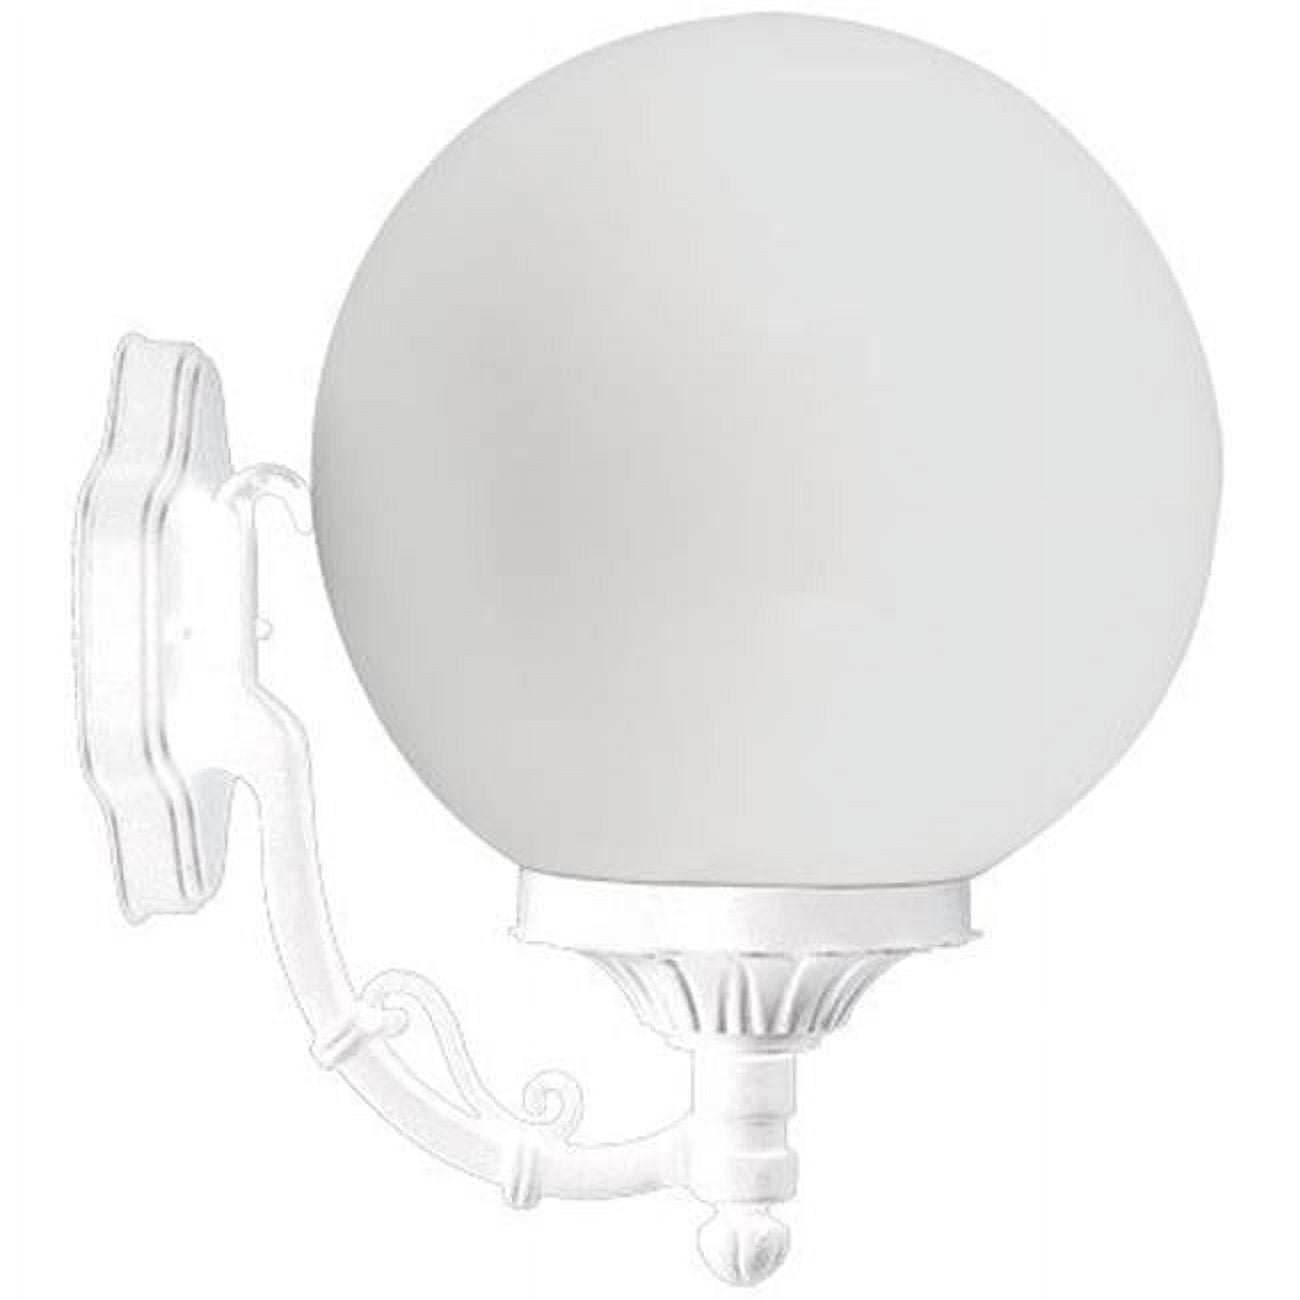 Picture of Dabmar Lighting GM245-W Powder Coated Cast Aluminum Wall Light Fixture, White - 13.88 x 9.63 x 12.25 in.